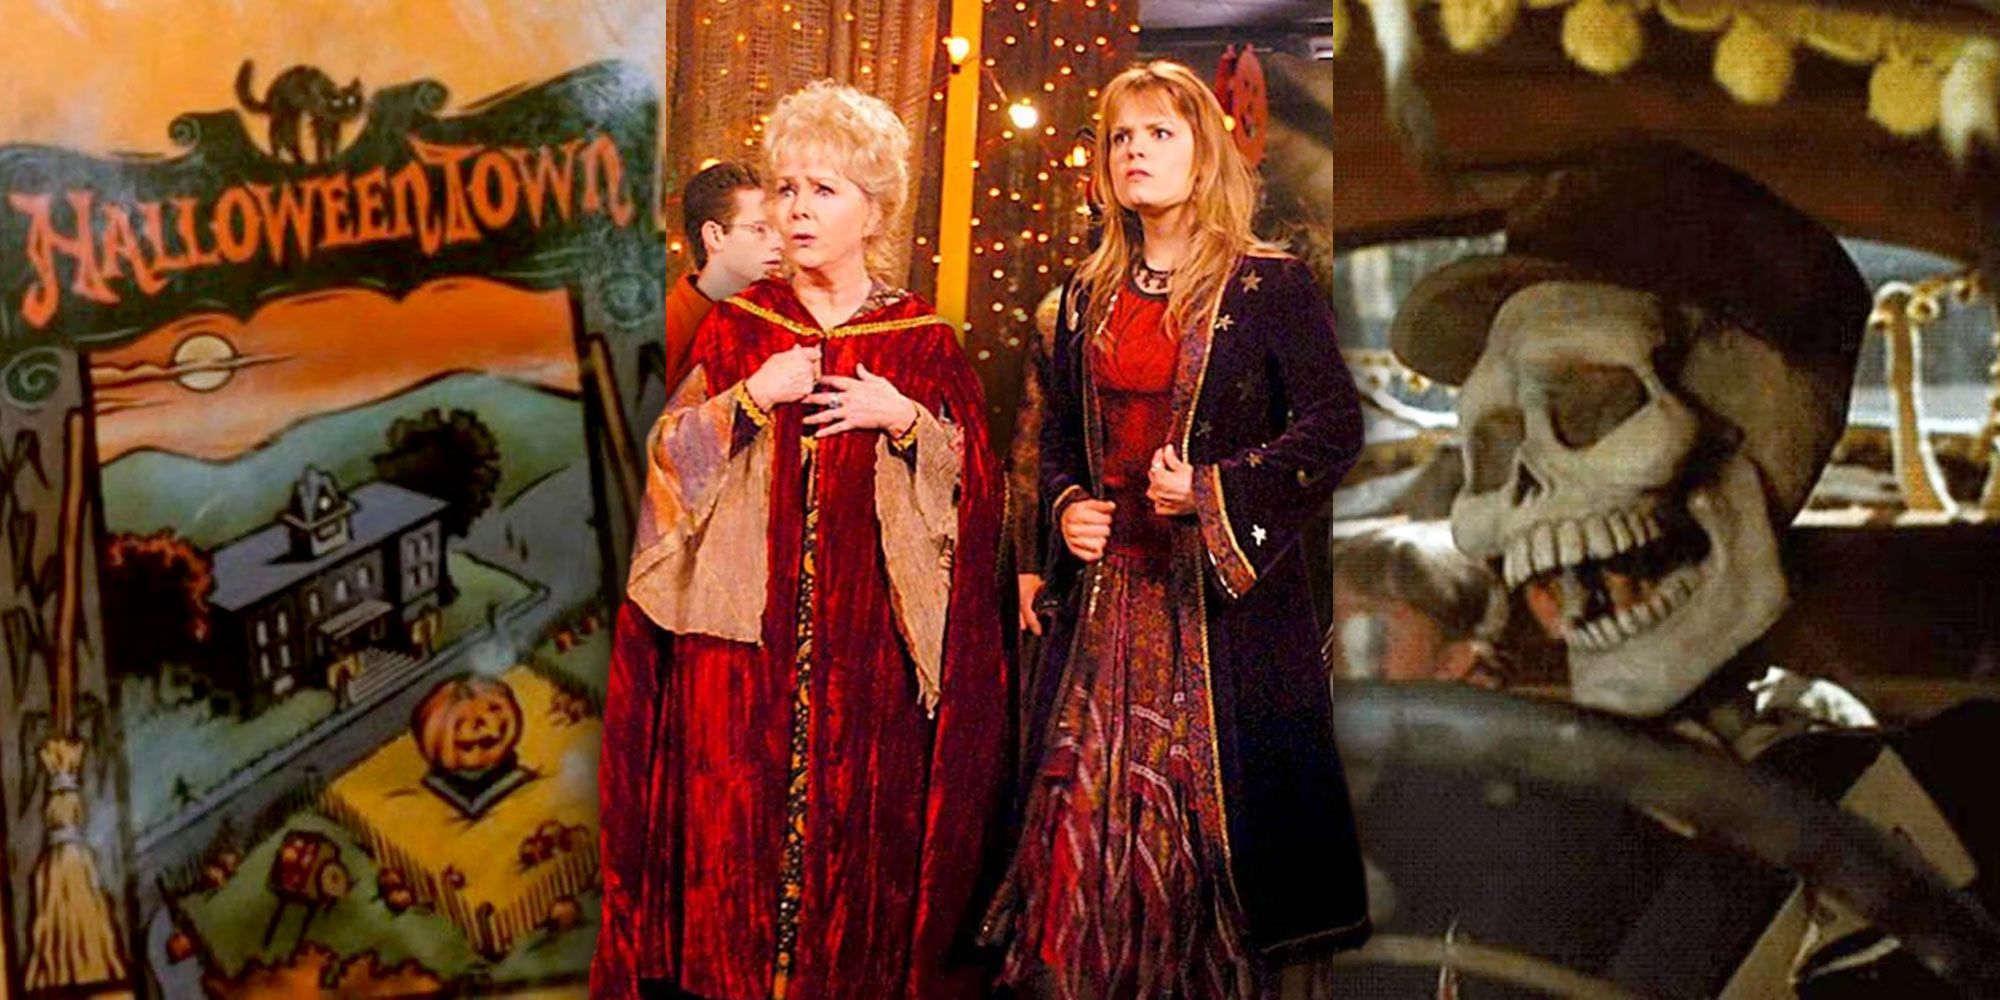 A split image features the Halloweentown book, Aggie and Marnie in the Halloweentown movies, and Benny the skeletal cab driver